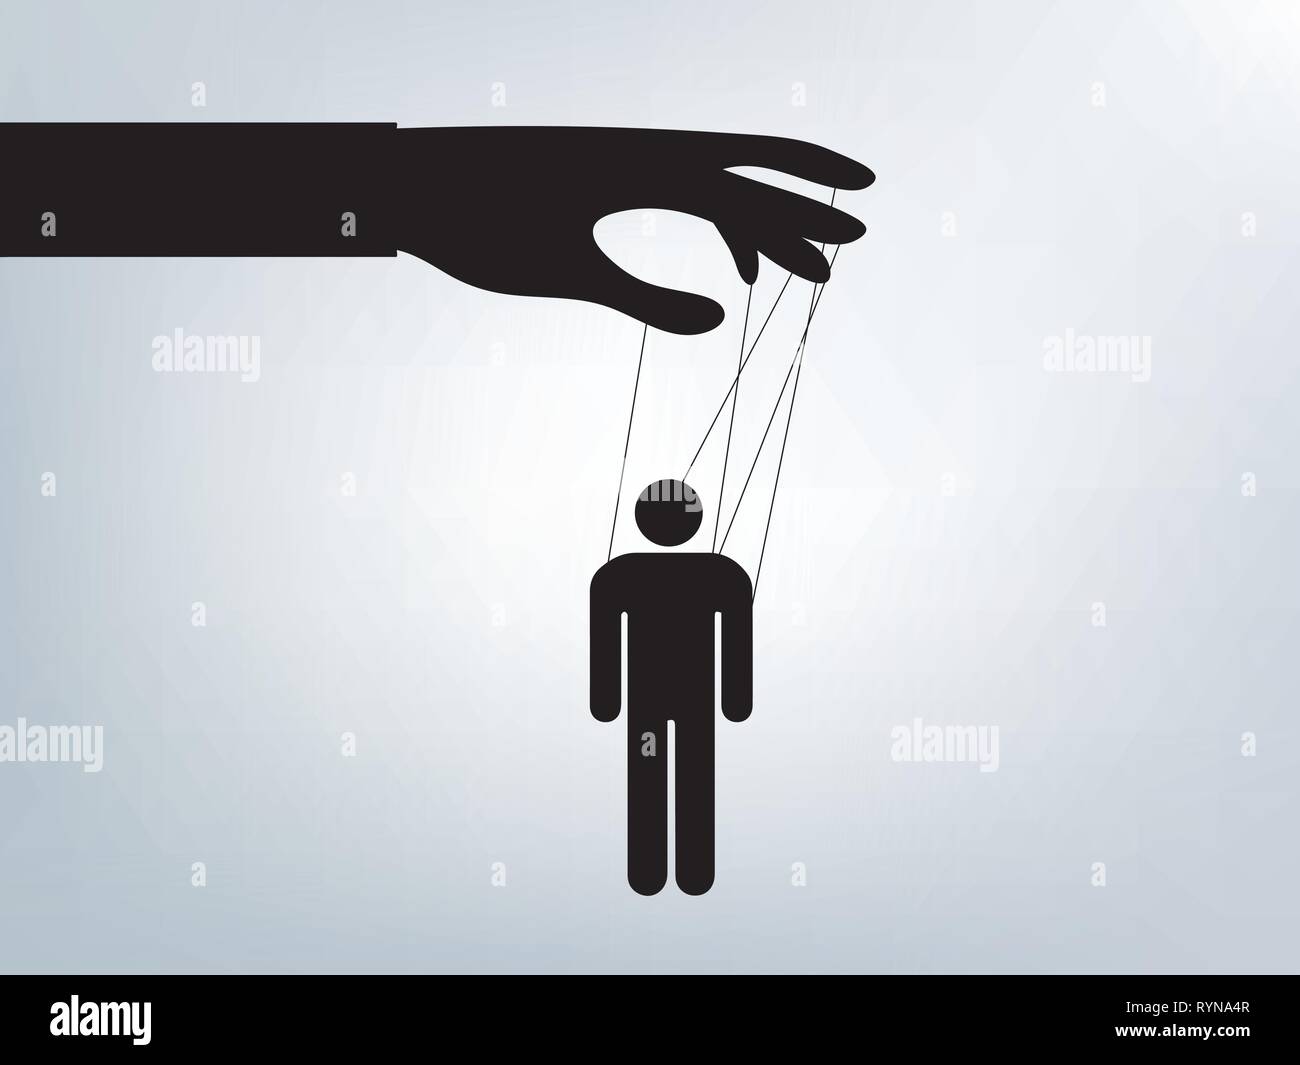 Conceptual stick figure vector with manipulated man Stock Vector